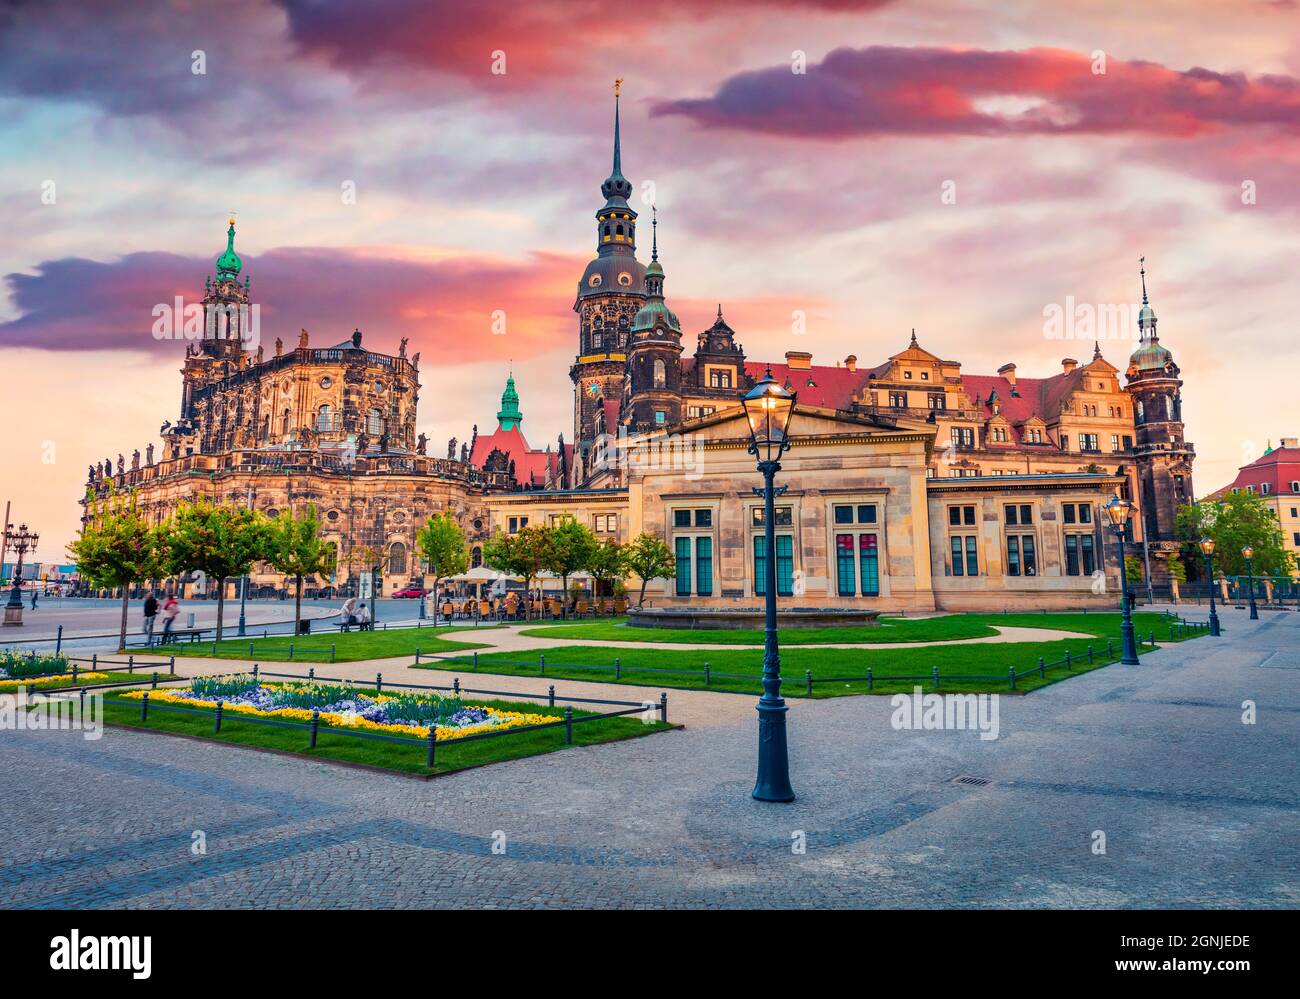 Impressive evening view of residence of electors and kings of Saxony in Dresden. Colorful sunset in Dresden, Germany. Castle or Royal Palace (Dresdner Stock Photo